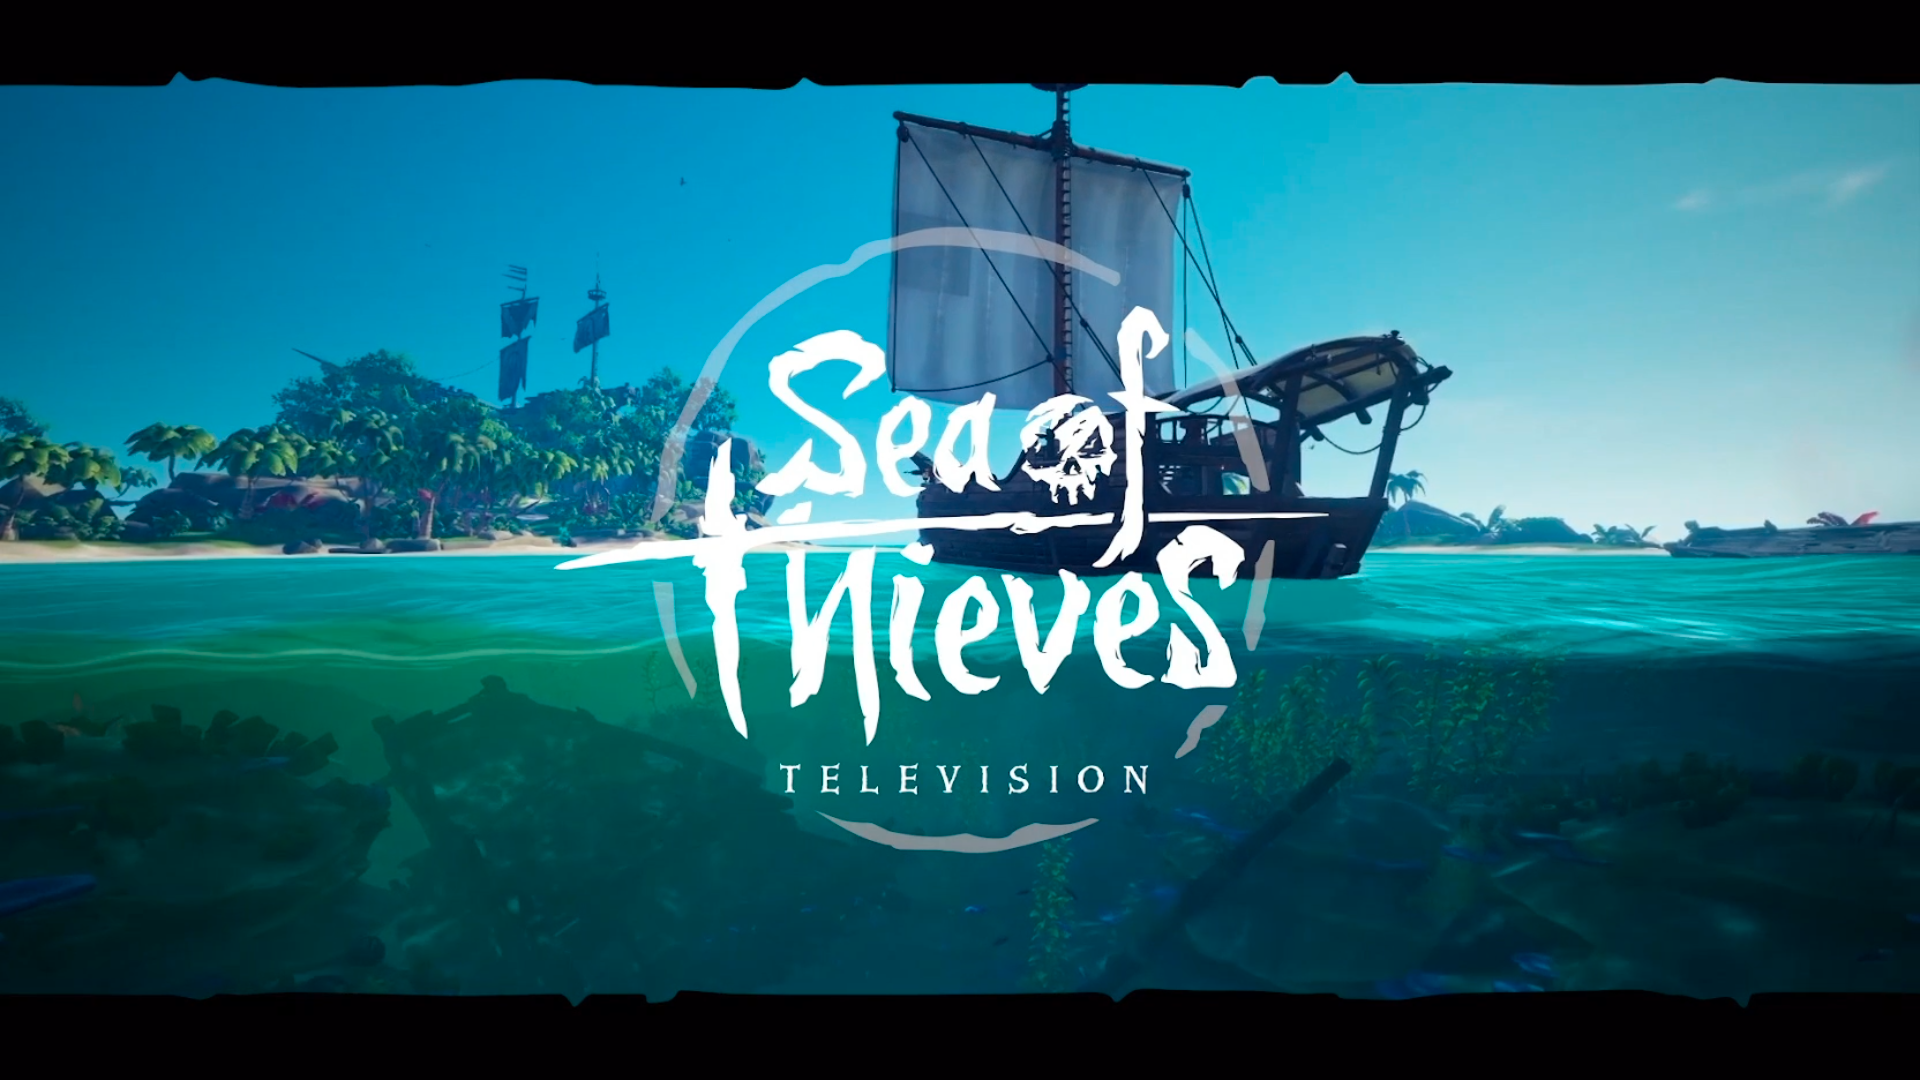 Sea of Thieves Television Intro Screen